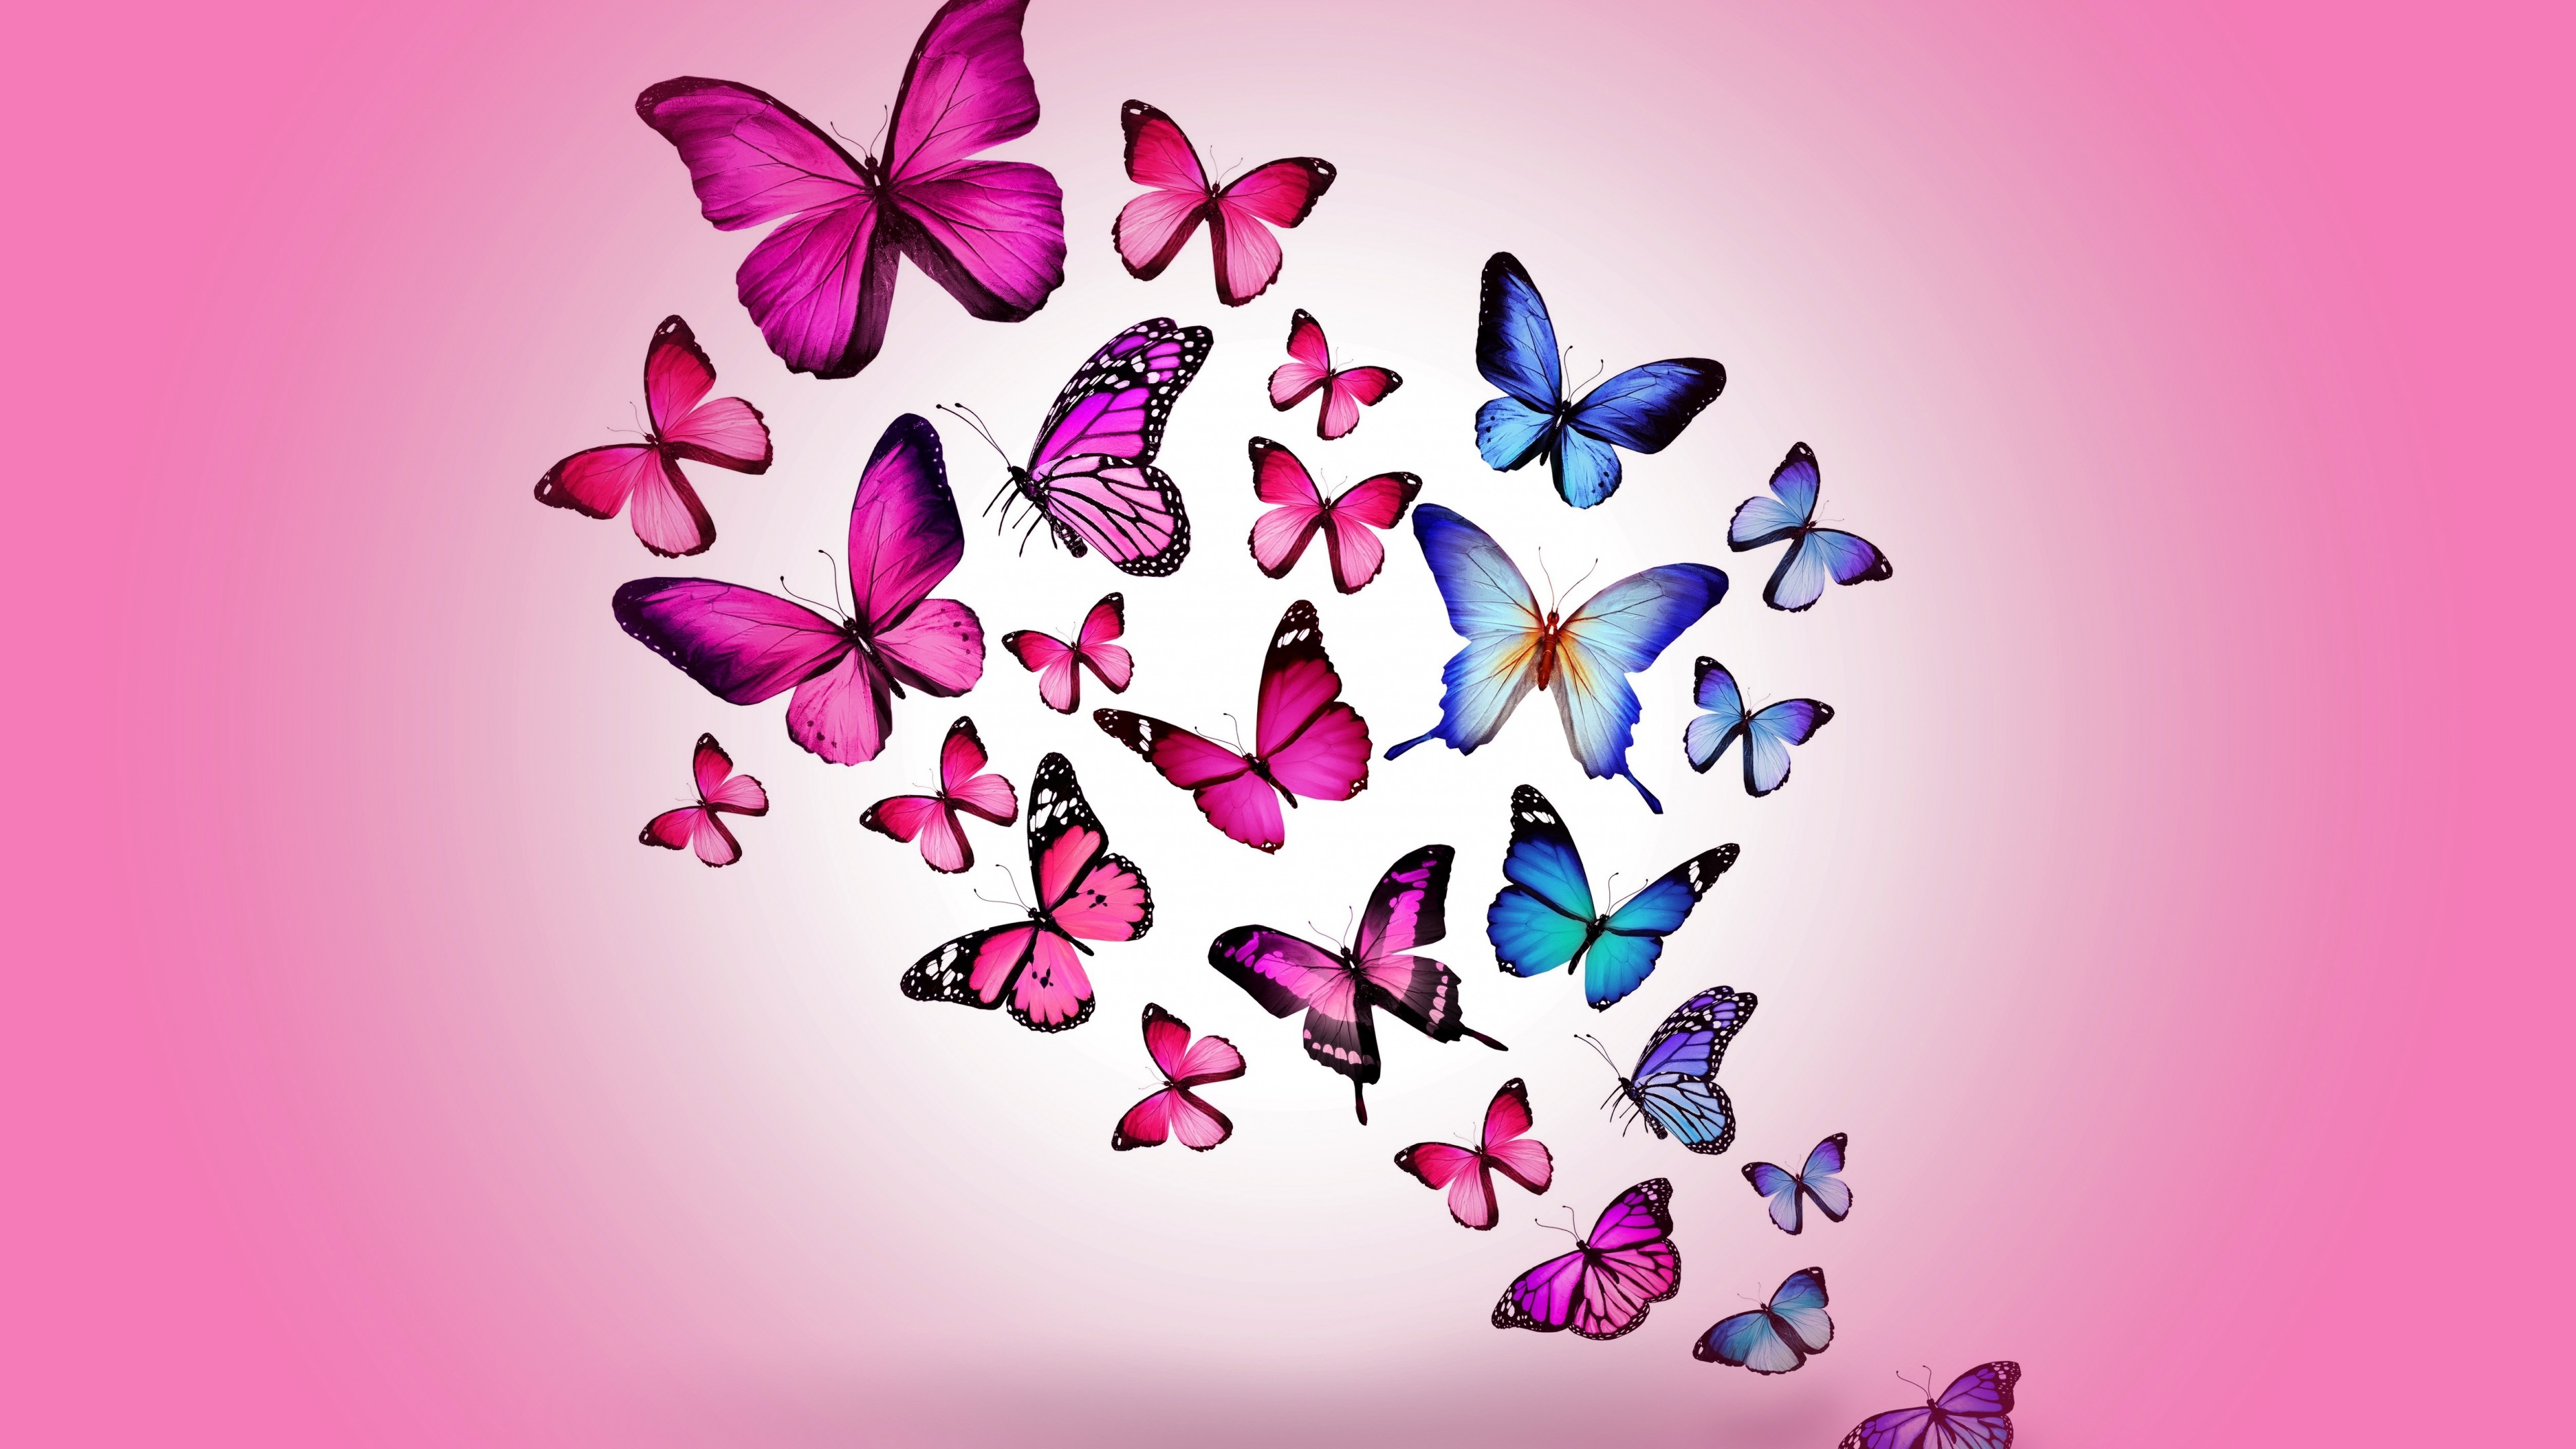 3840x2160 Butterfly pink background #9879